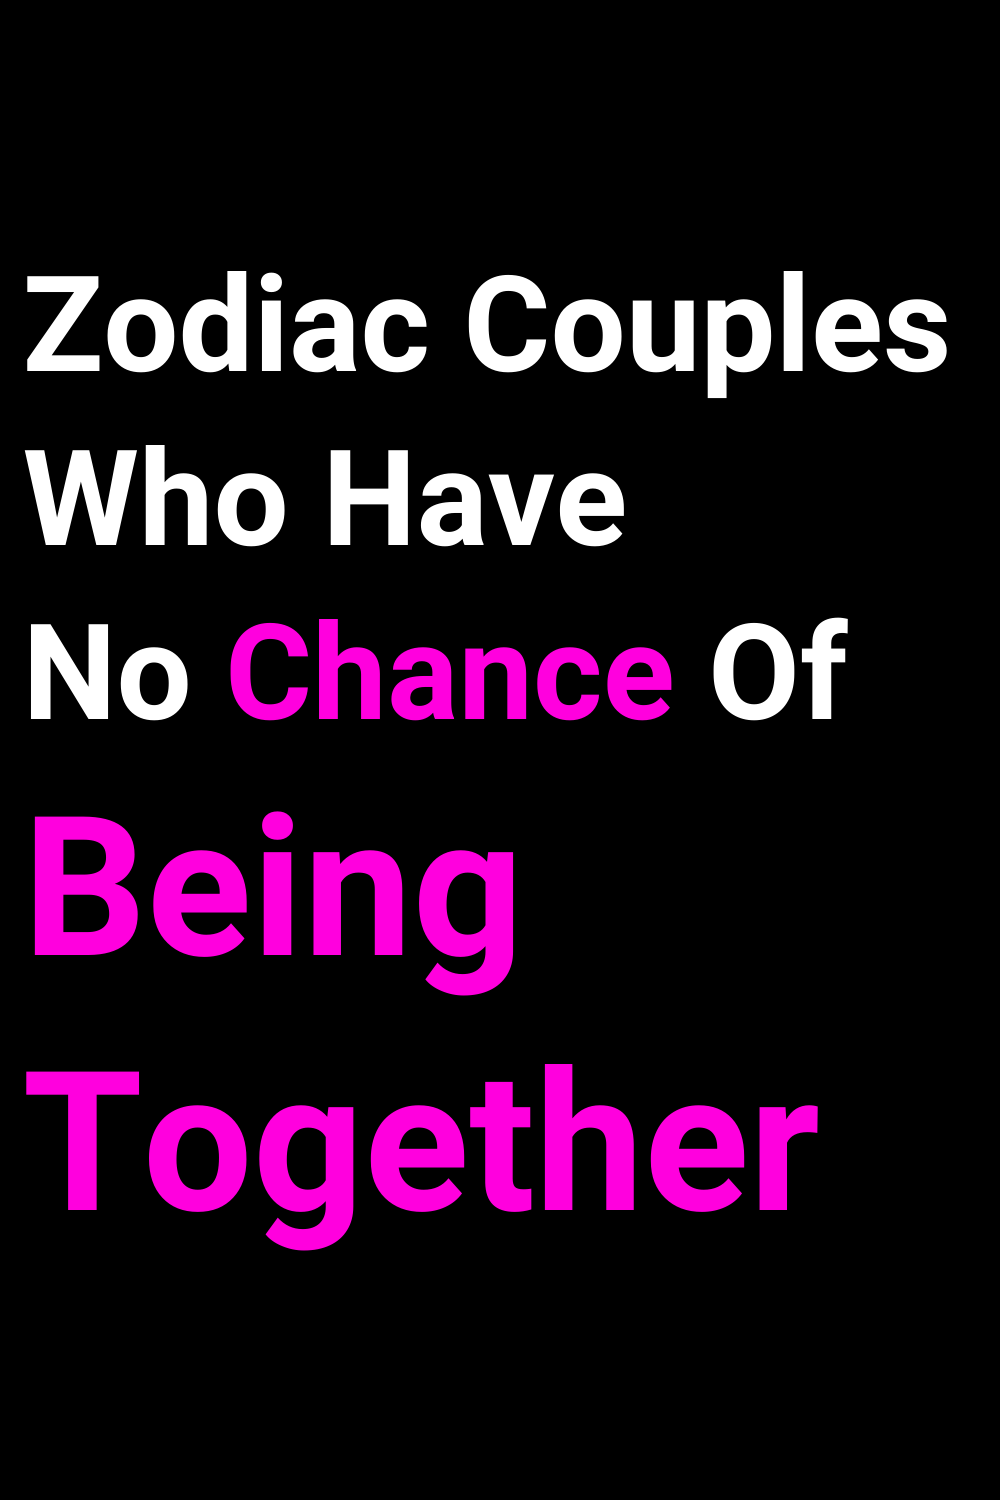 Zodiac Couples Who Have No Chance Of Being Together